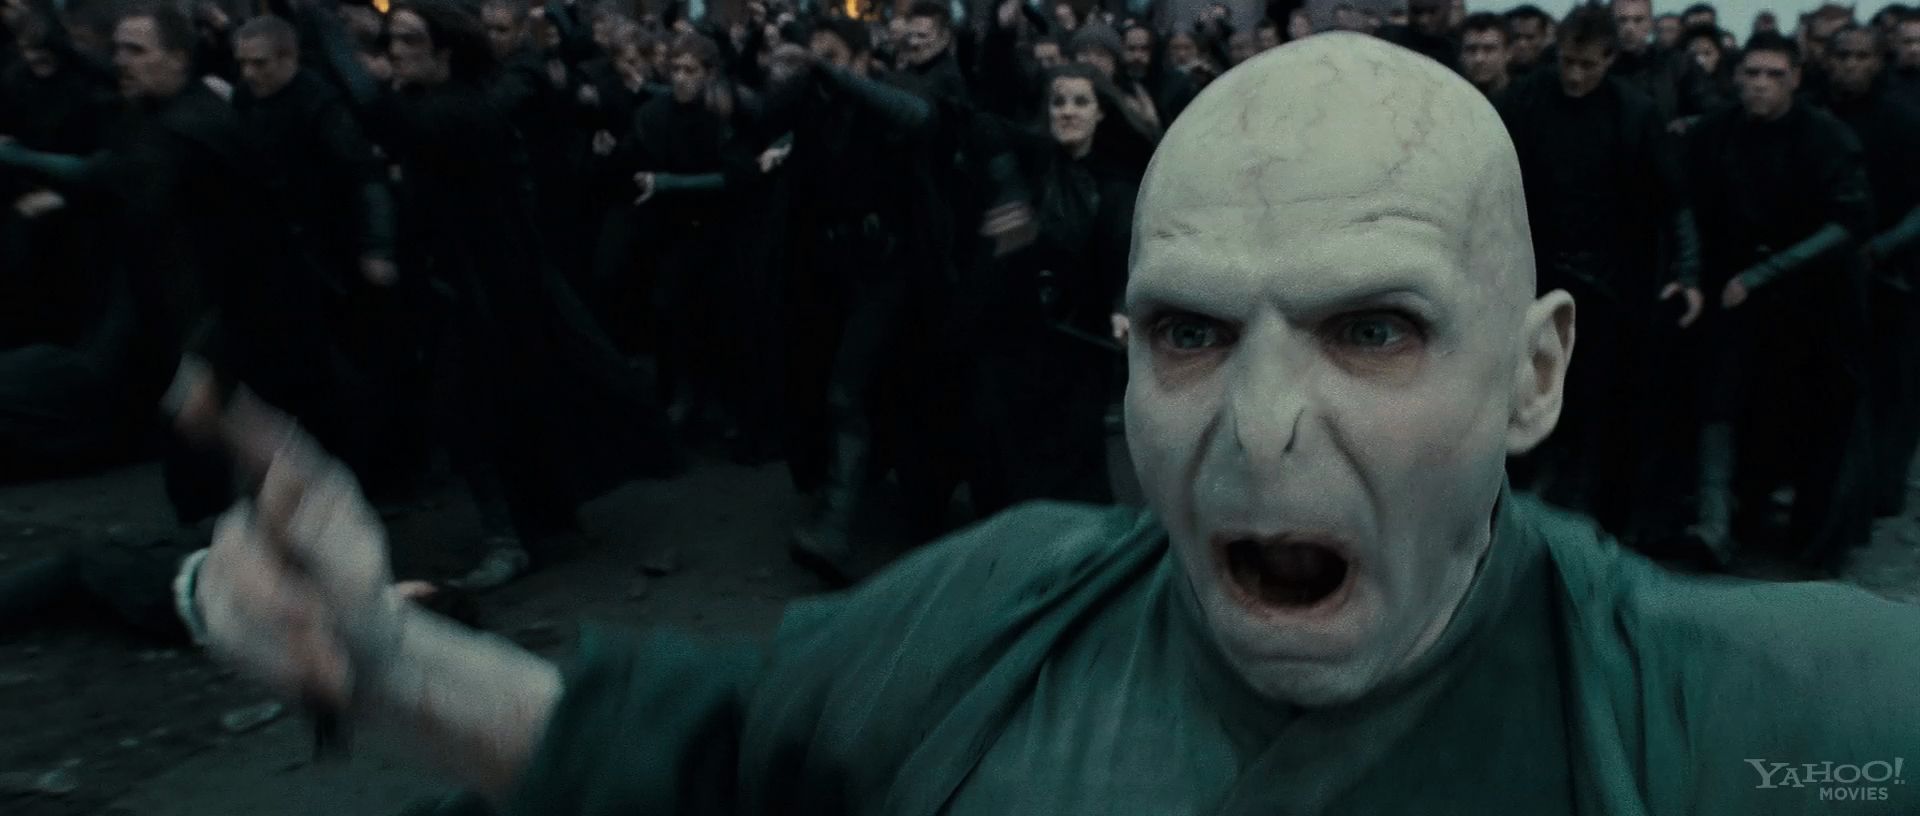 Harry Potter and the Deathly Hallow Trailer Still #4